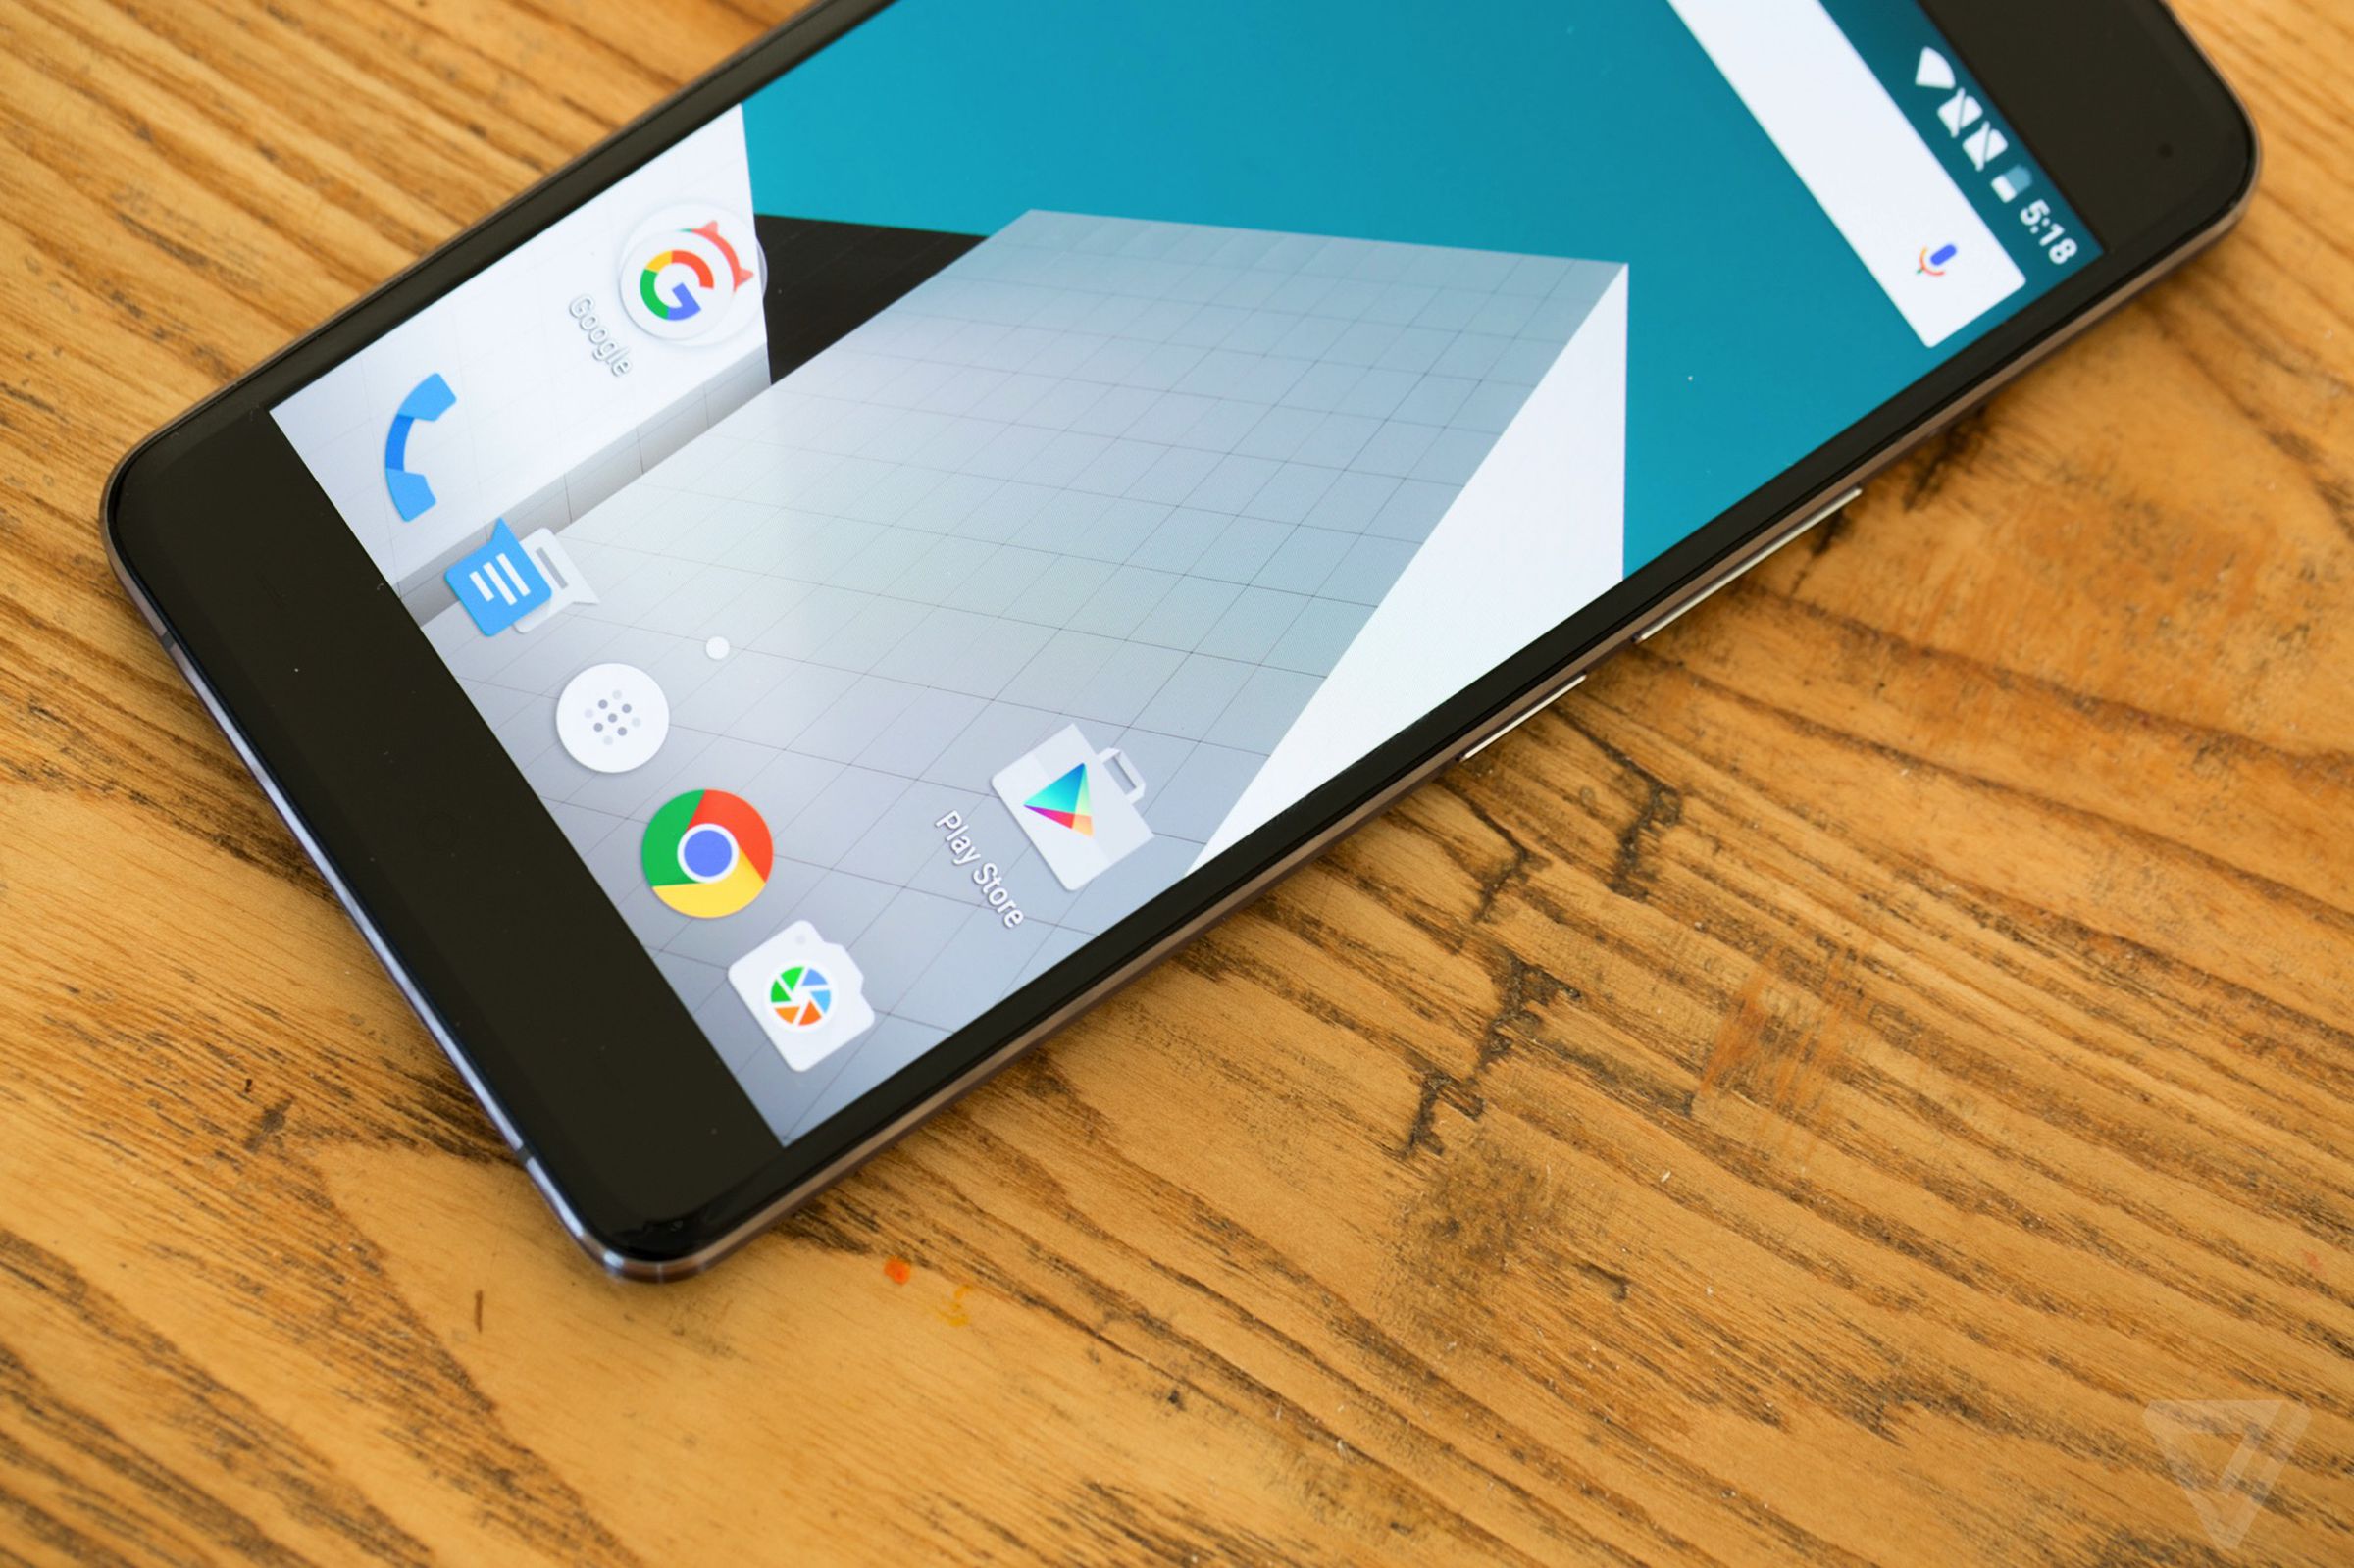 OnePlus X hands-on